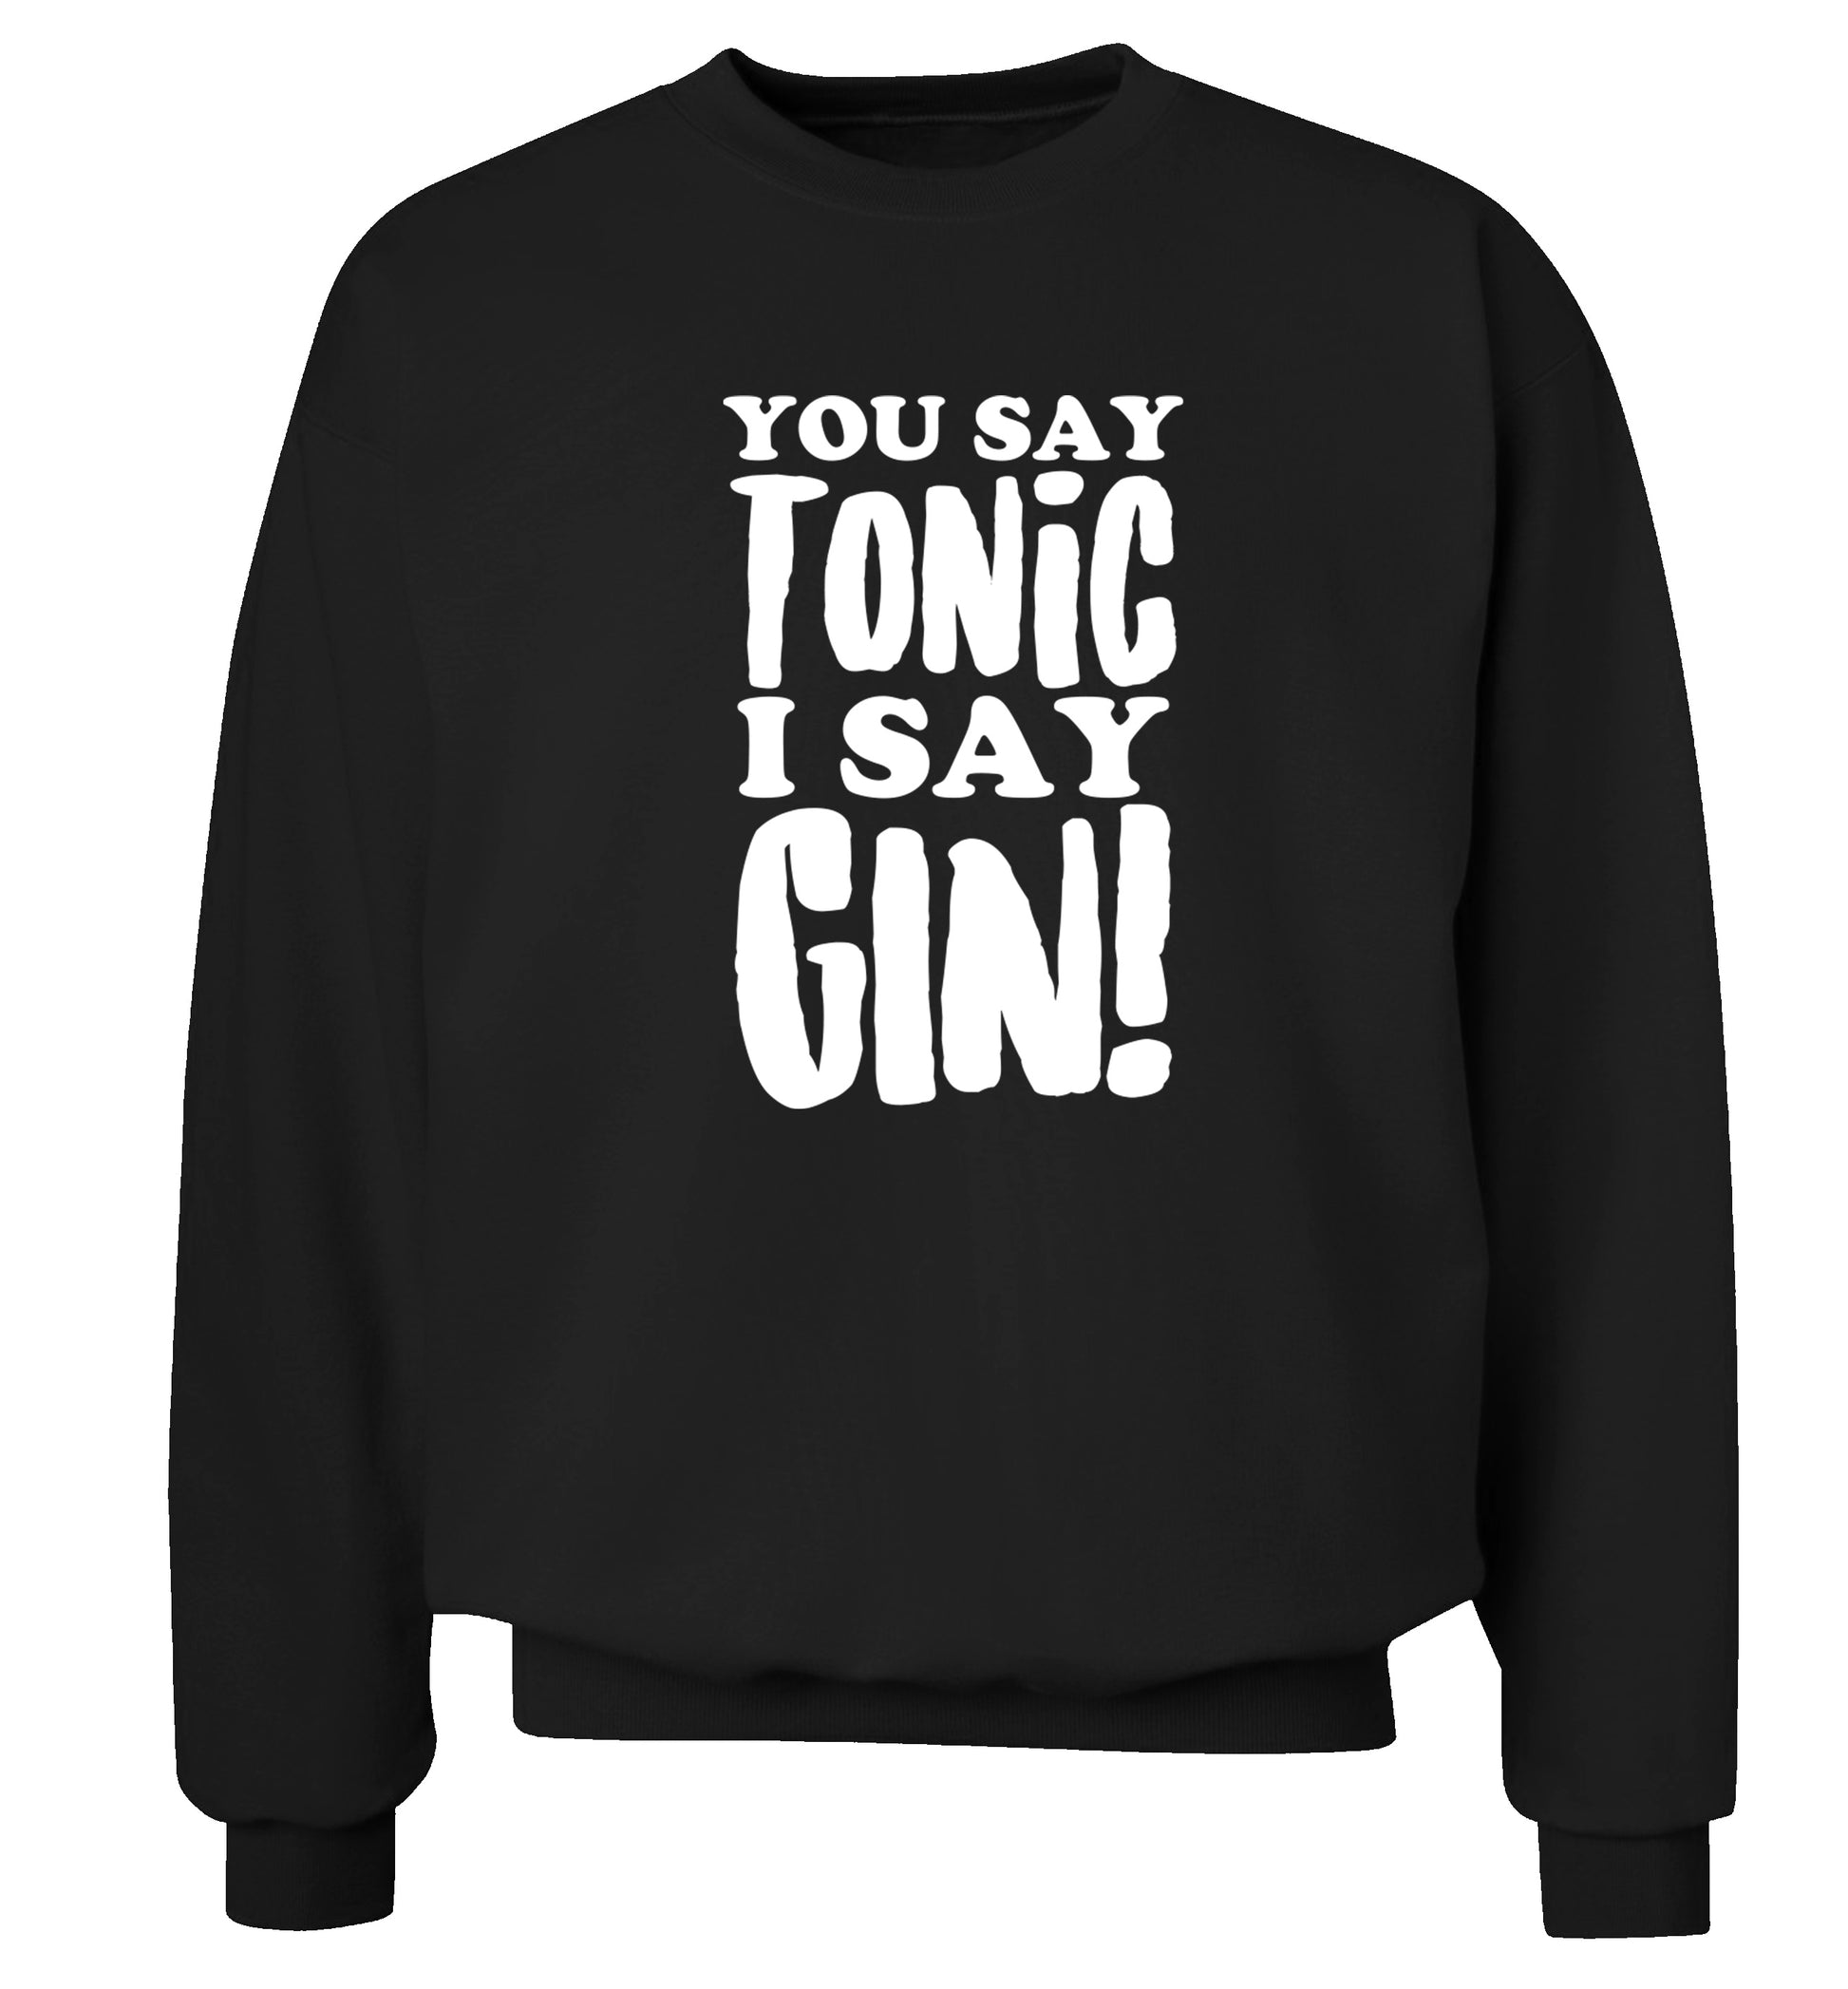 You say tonic I say gin! Adult's unisex black Sweater 2XL